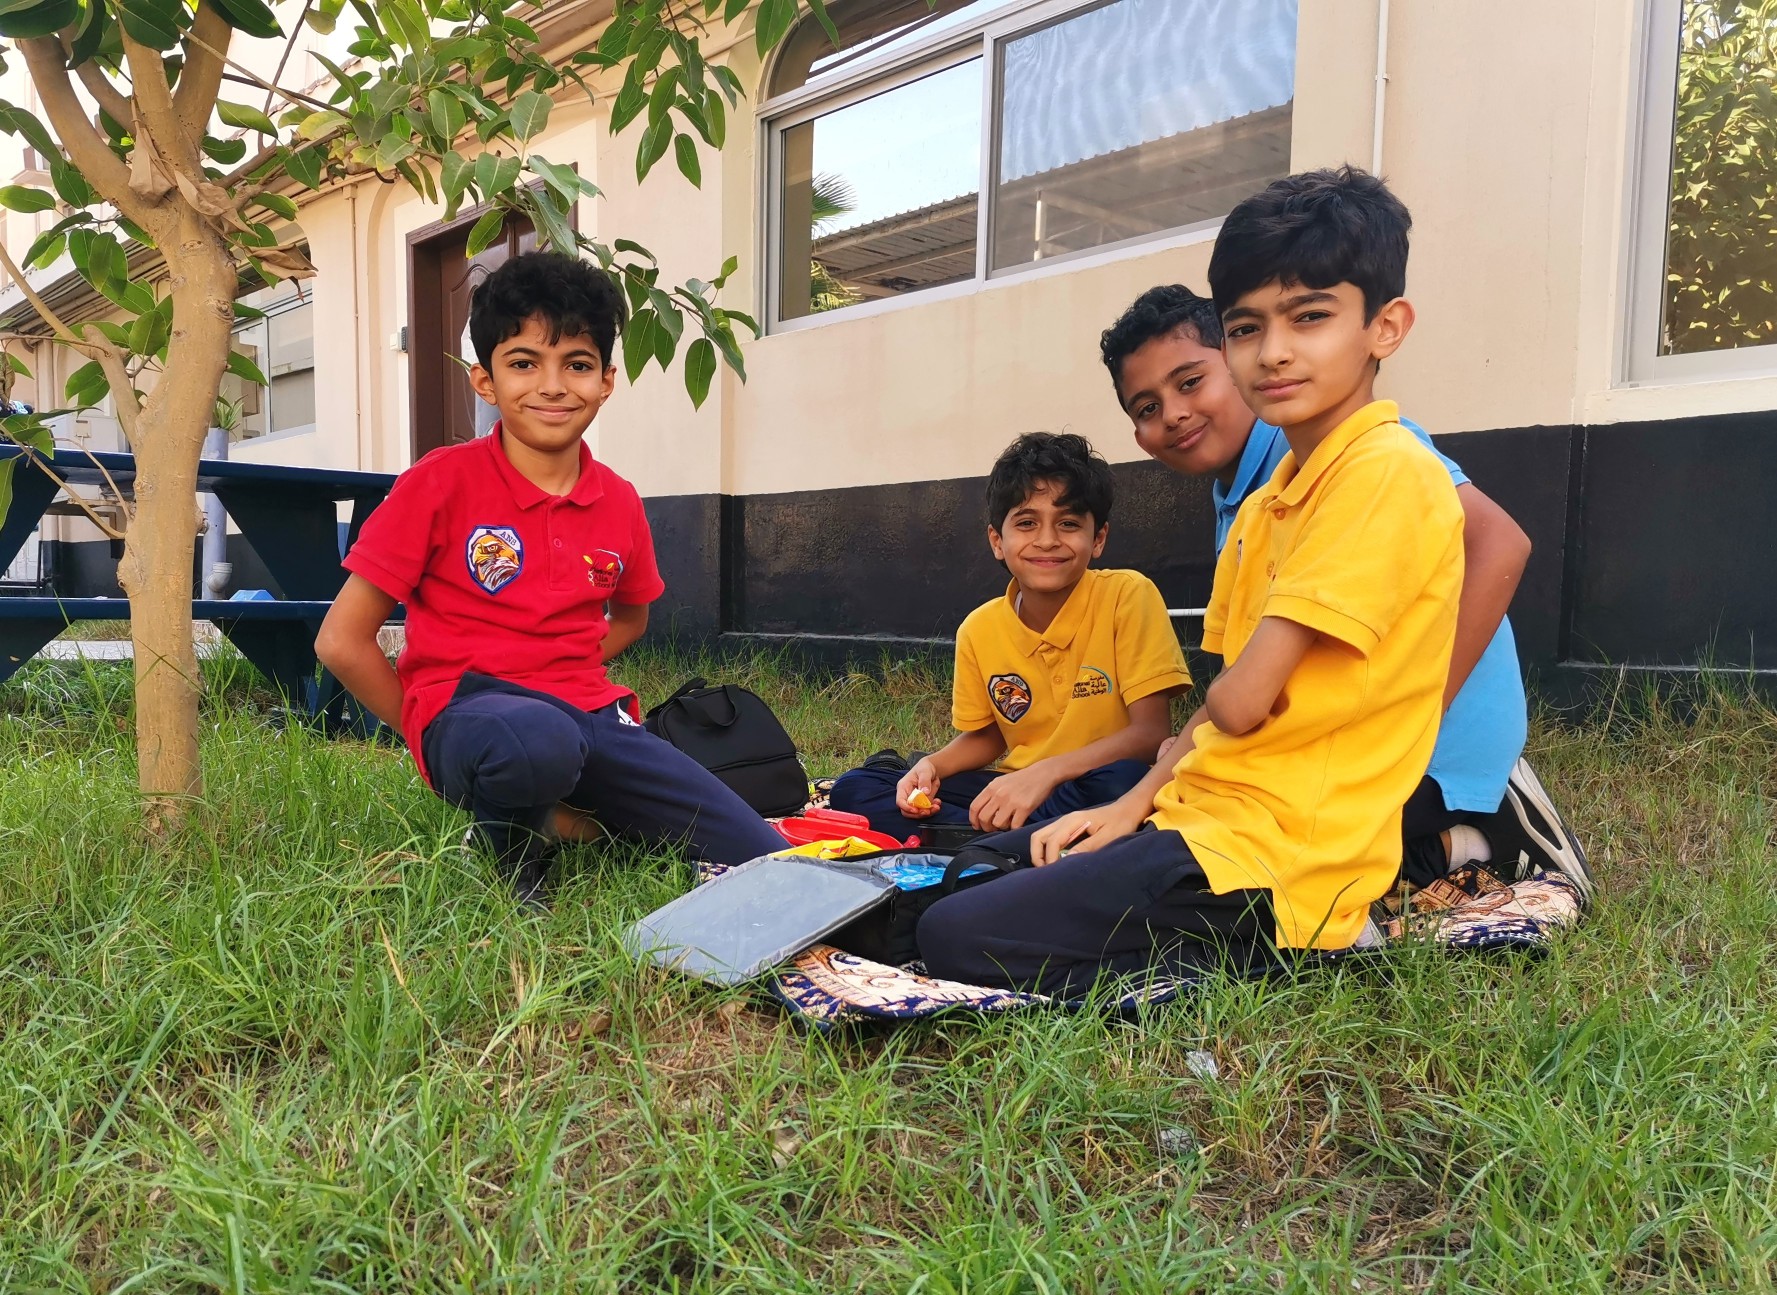 Alia National School builds a positive partnership with families and the community